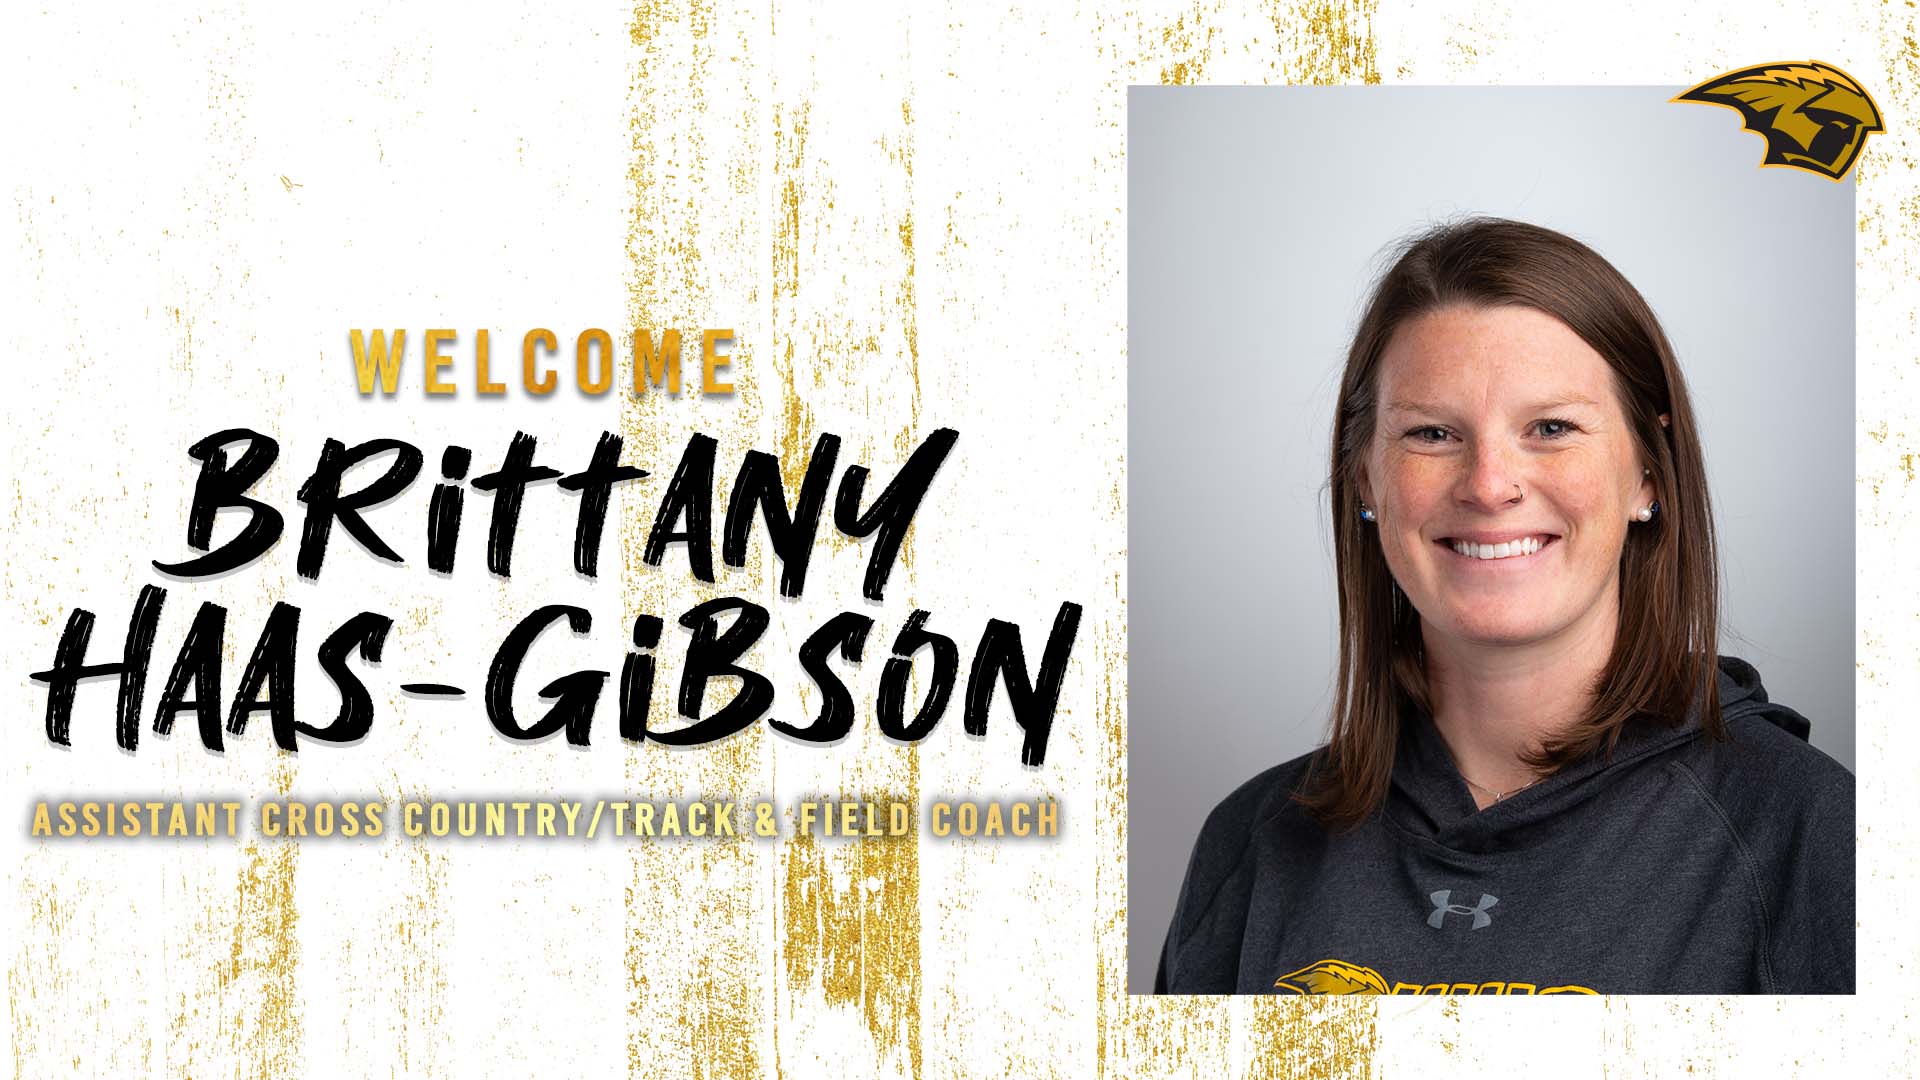 Haas-Gibson Named Assistant Cross Country/Track and Field Coach